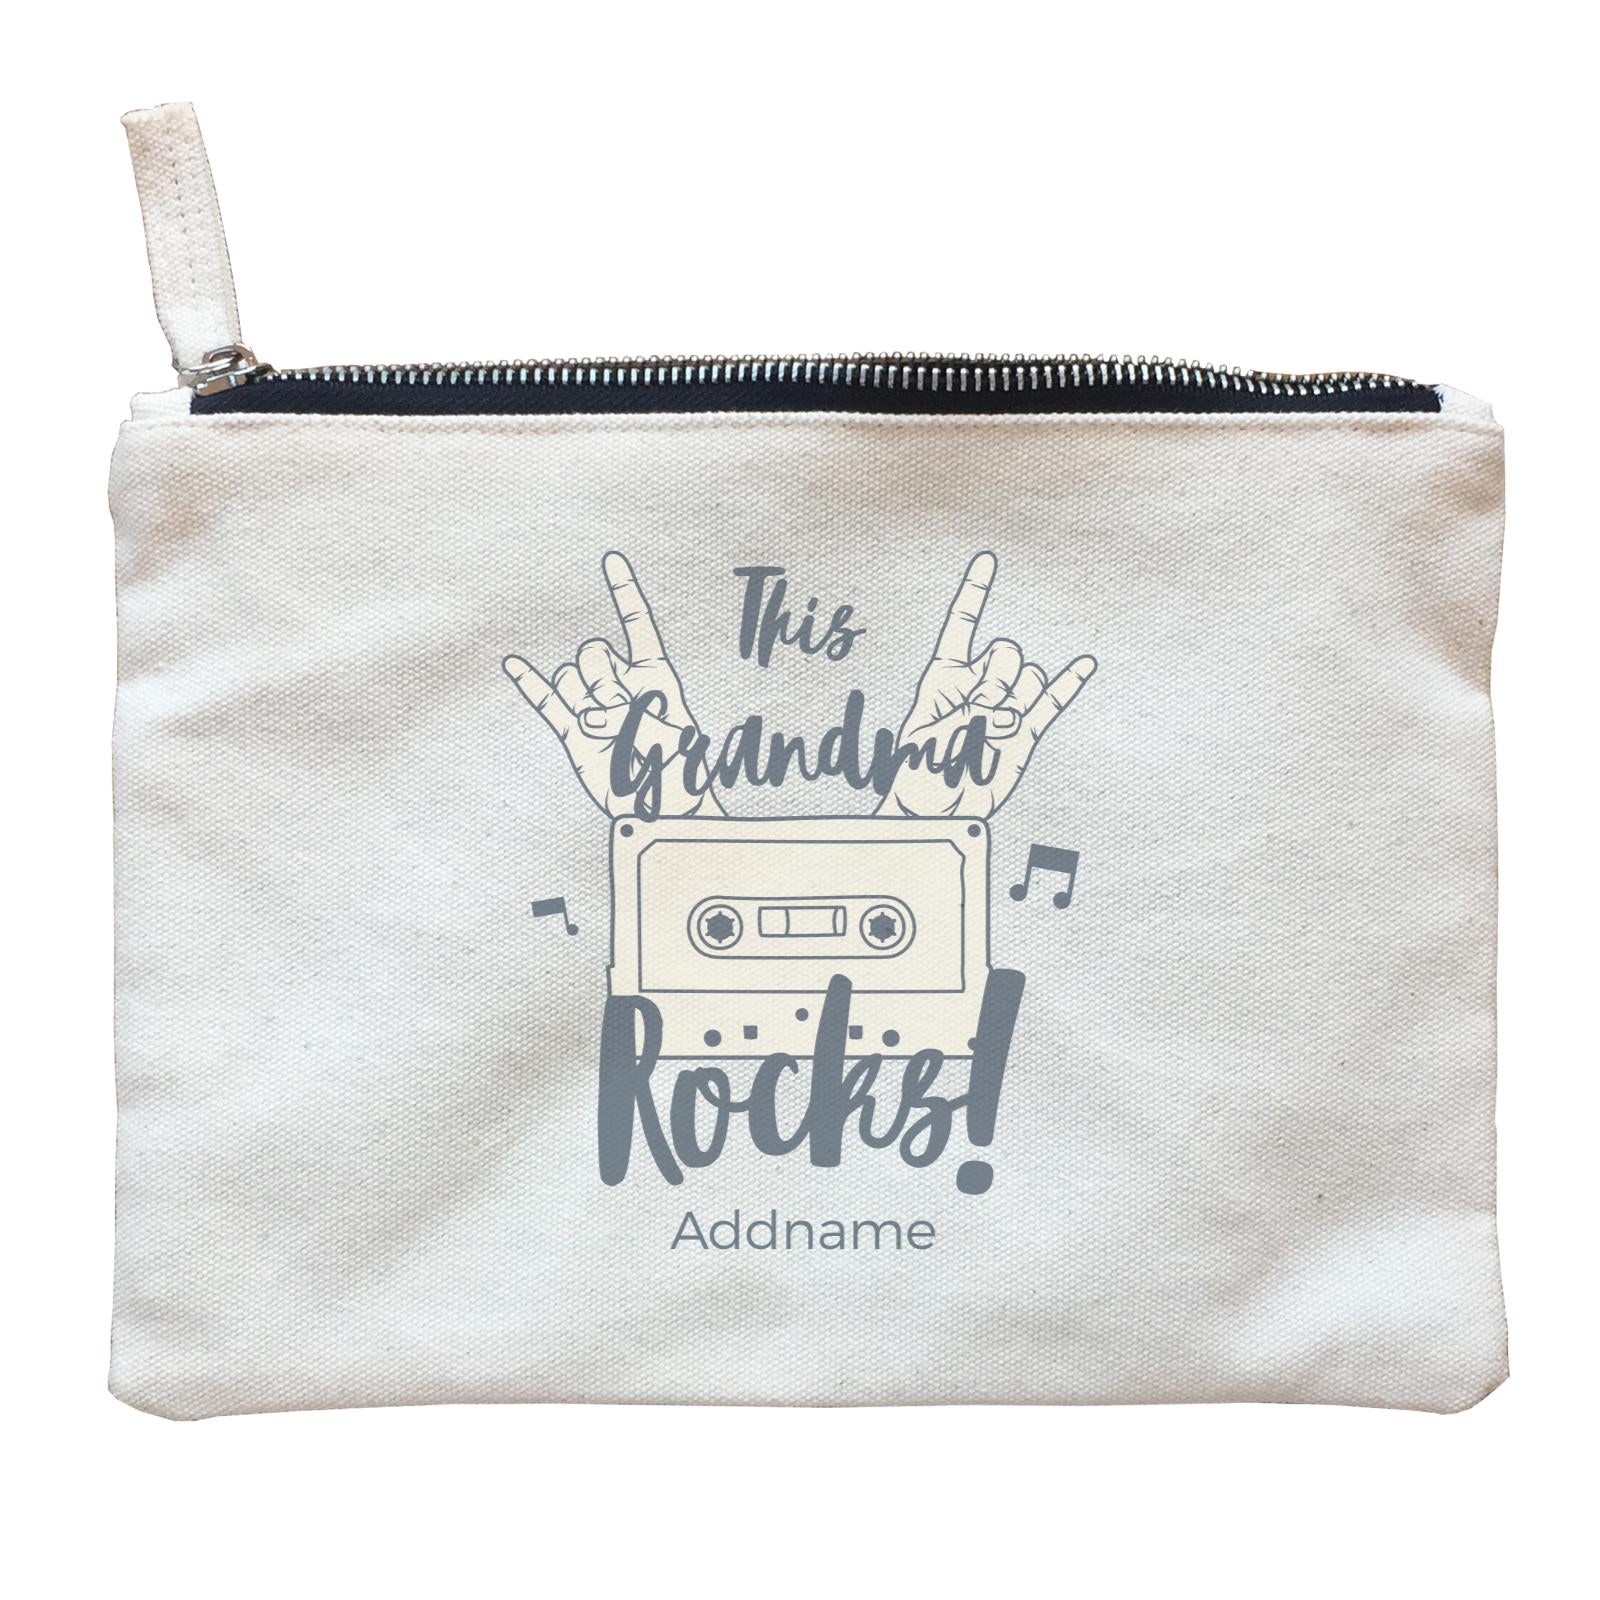 Awesome Mom 1 This Grandma Rocks! Cassette Addname Zipper Pouch